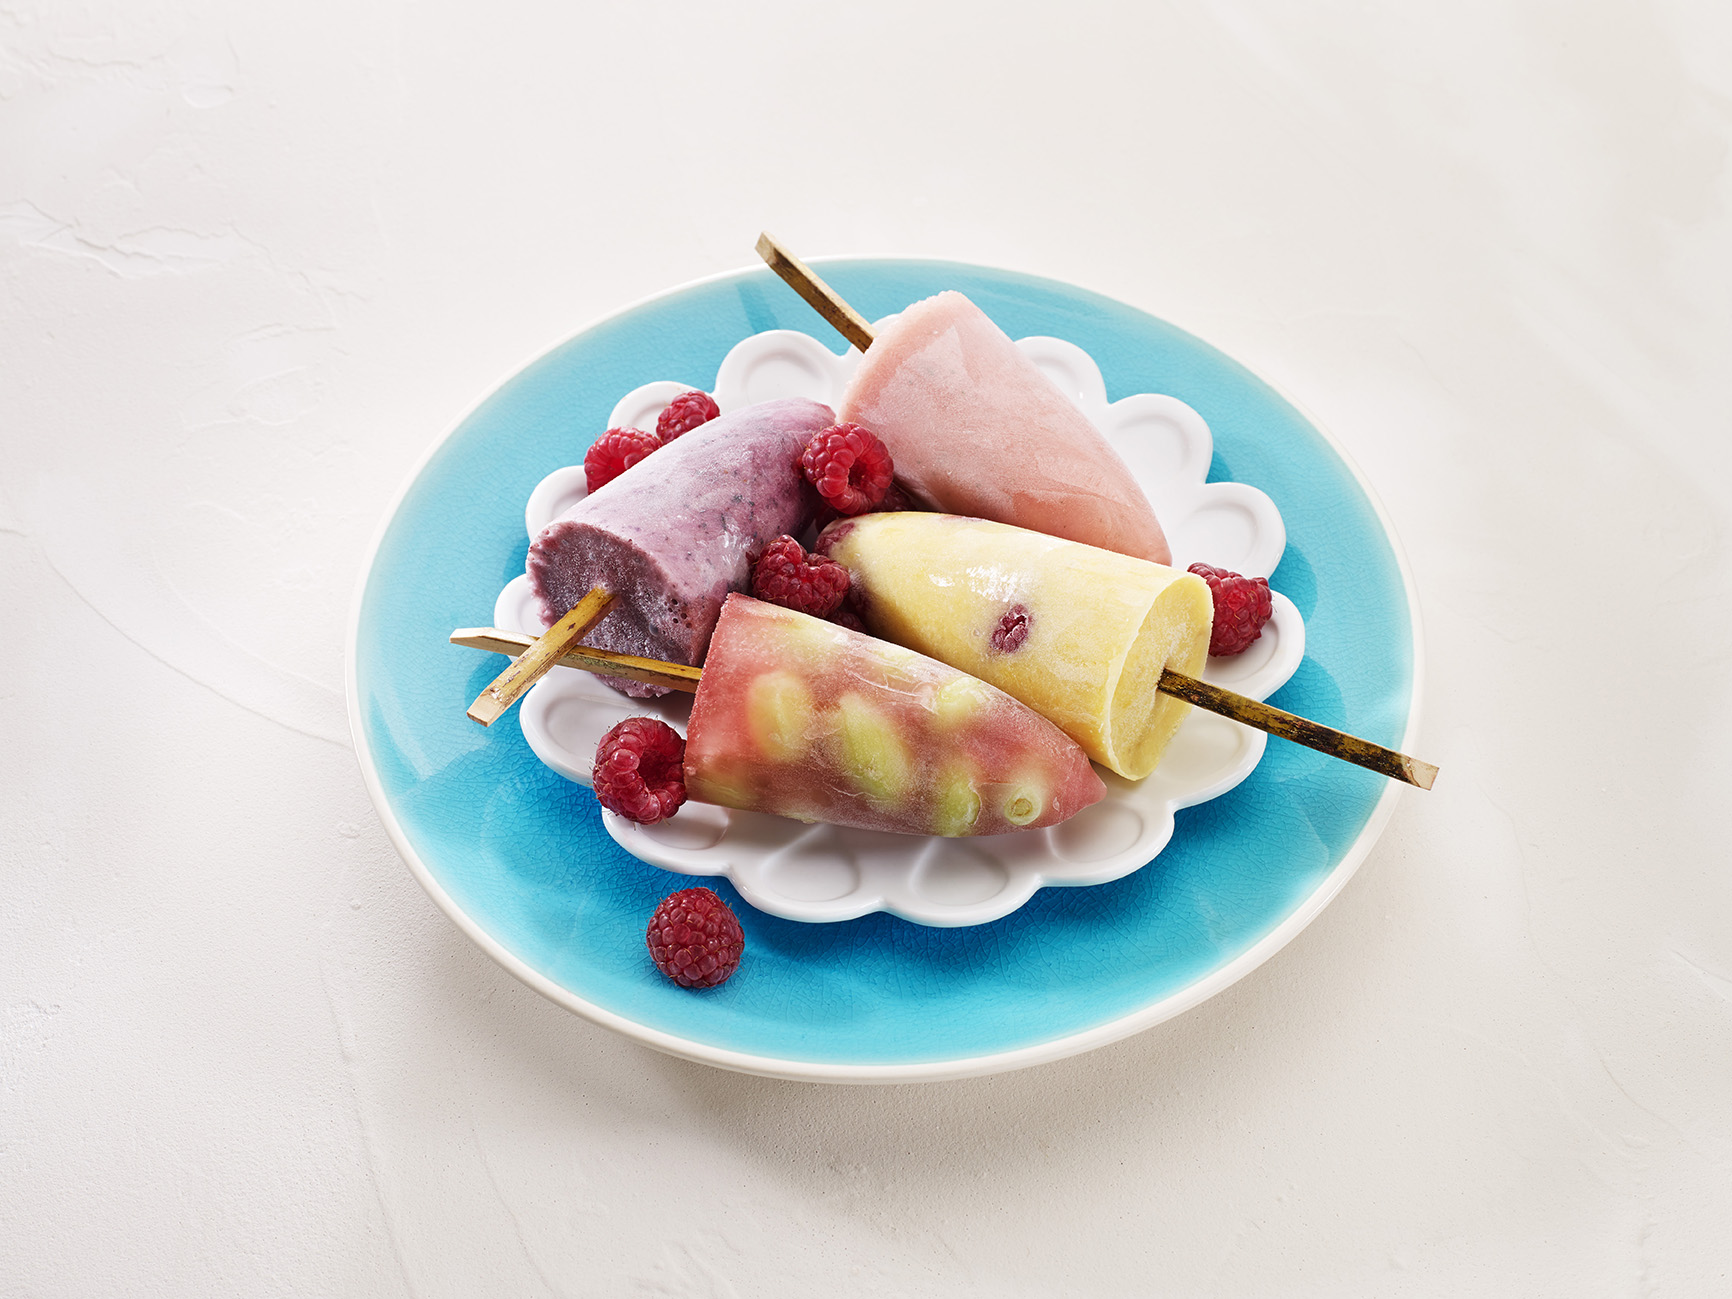 Popsicle recipes